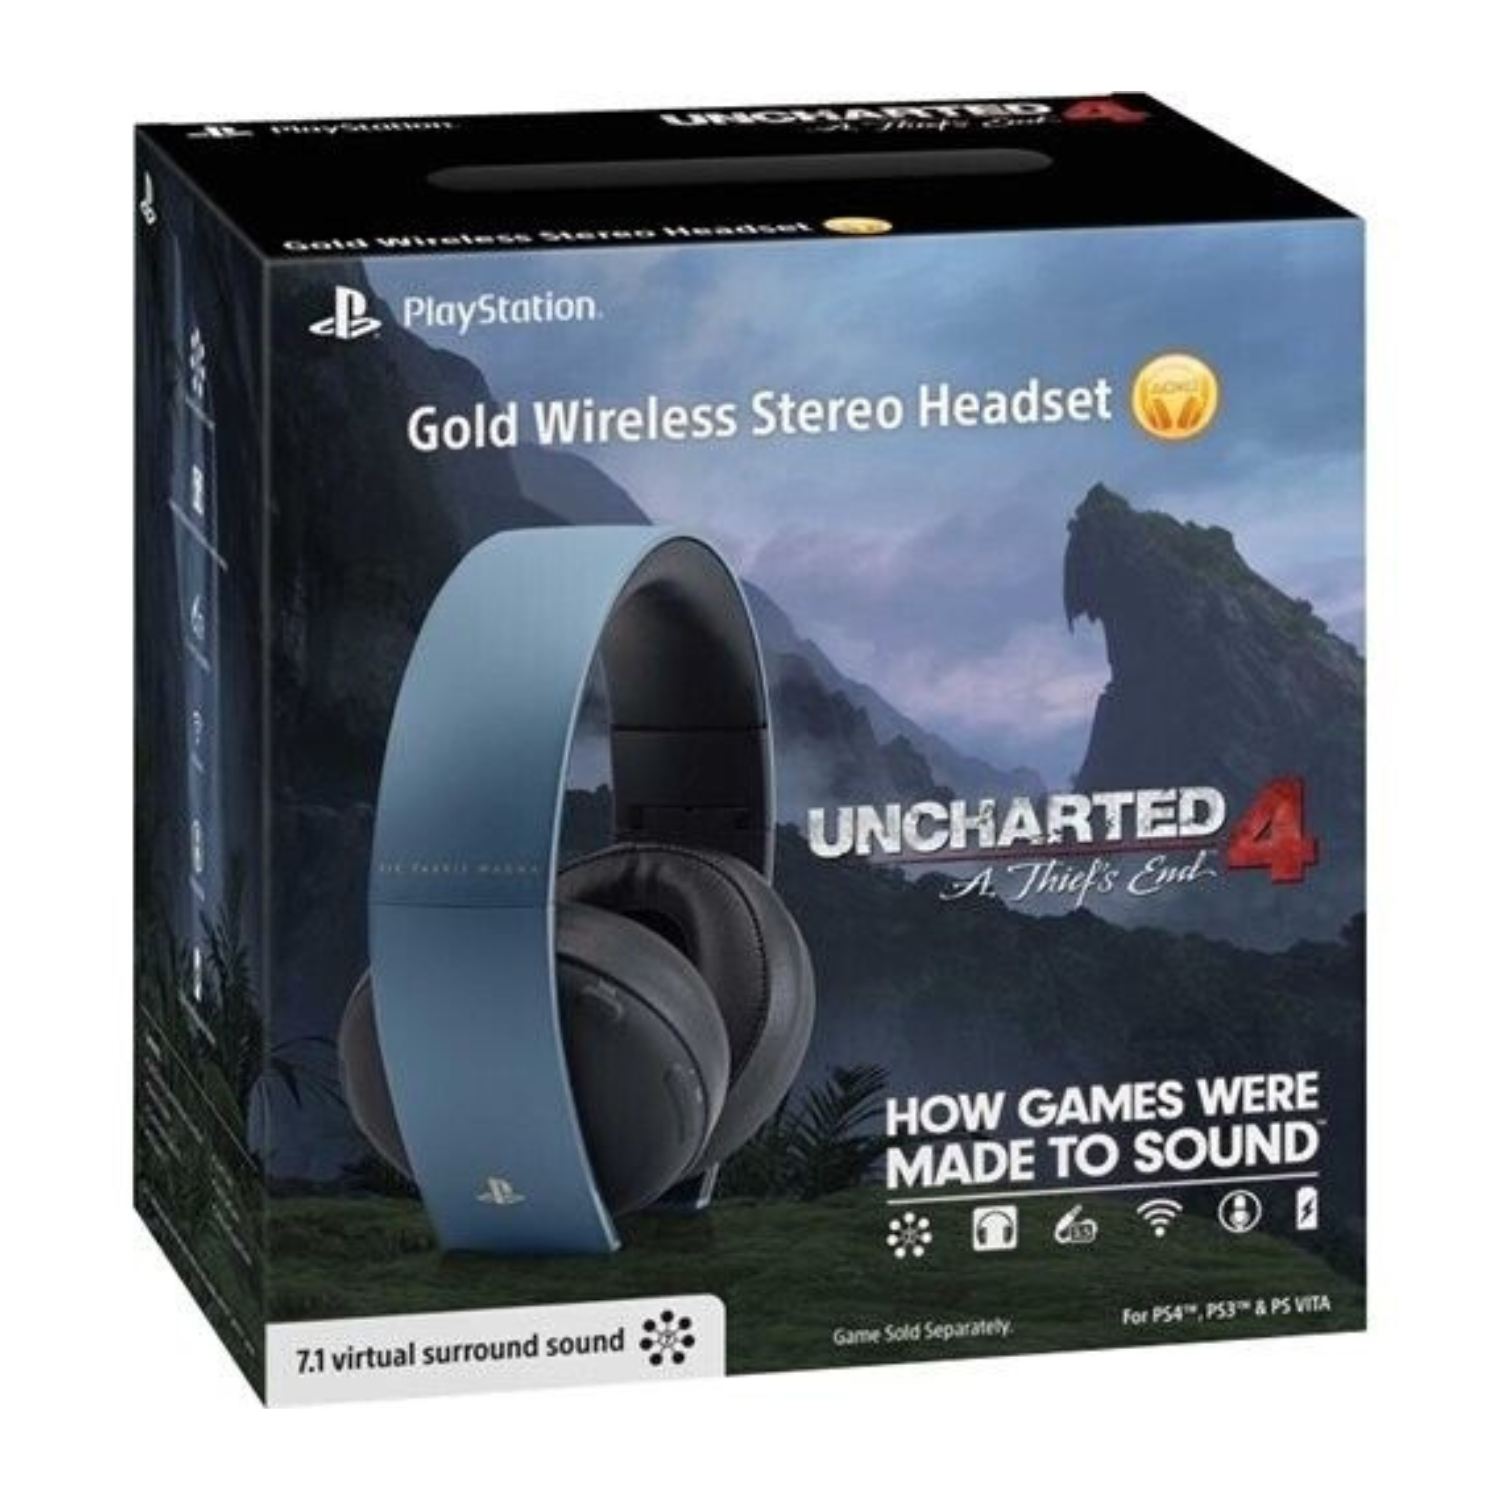 Gold Wireless Stereo Headset Uncharted 4